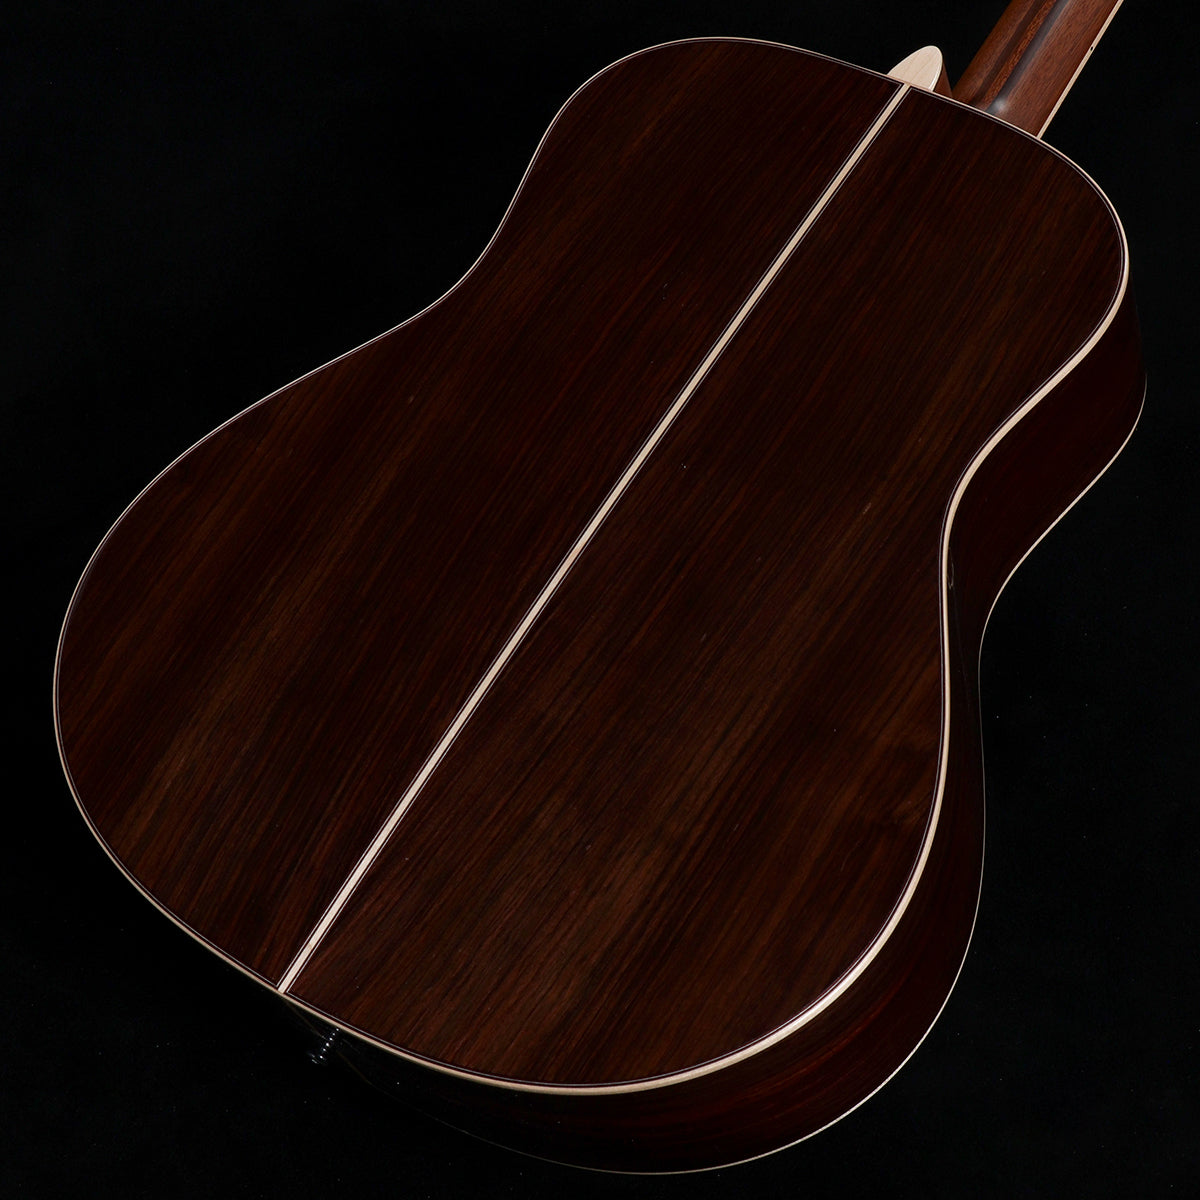 [SN IJN009A] YAMAHA / LL36 ARE Natural Handcrafted(Weight:2.17kg) [05]